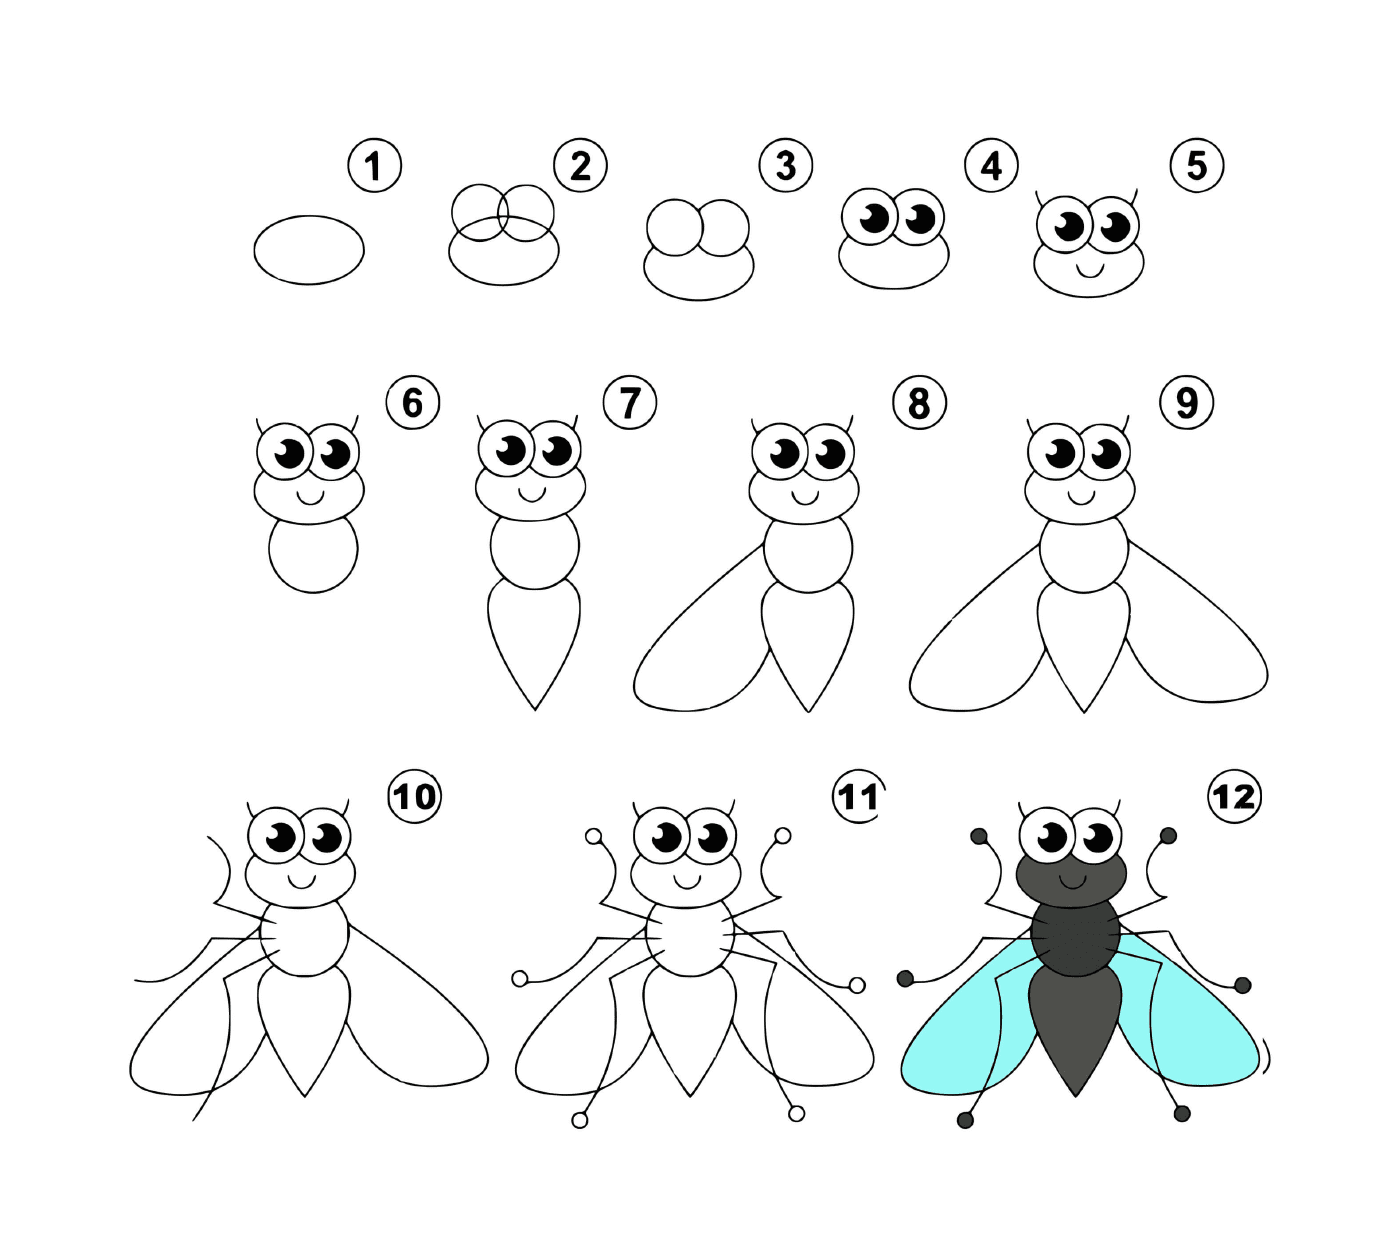  How to draw a fly easily 